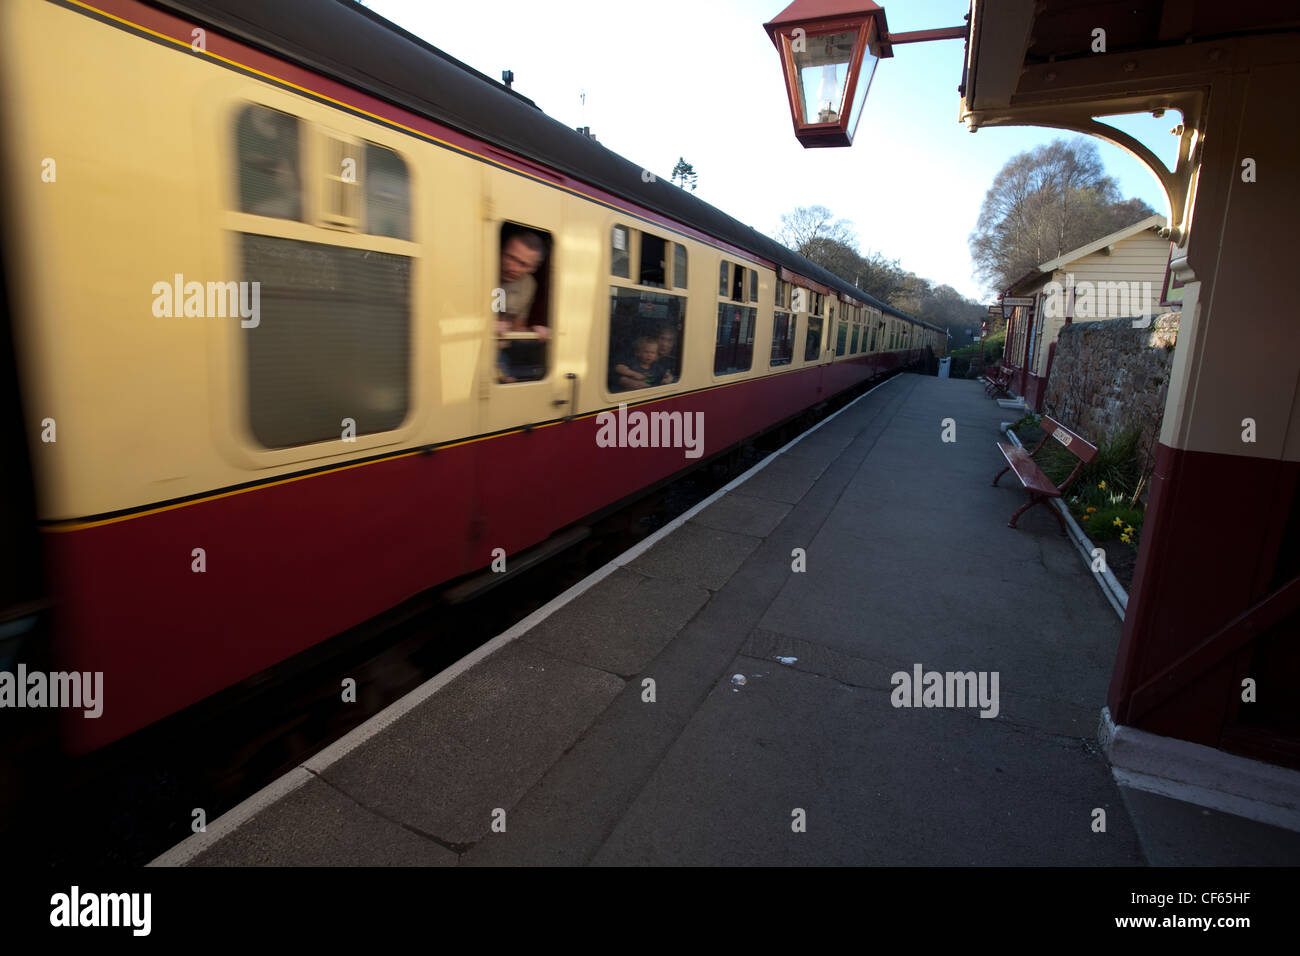 A heritage railway train passing through Goathland station on the North Yorkshire Moors Railway. Stock Photo